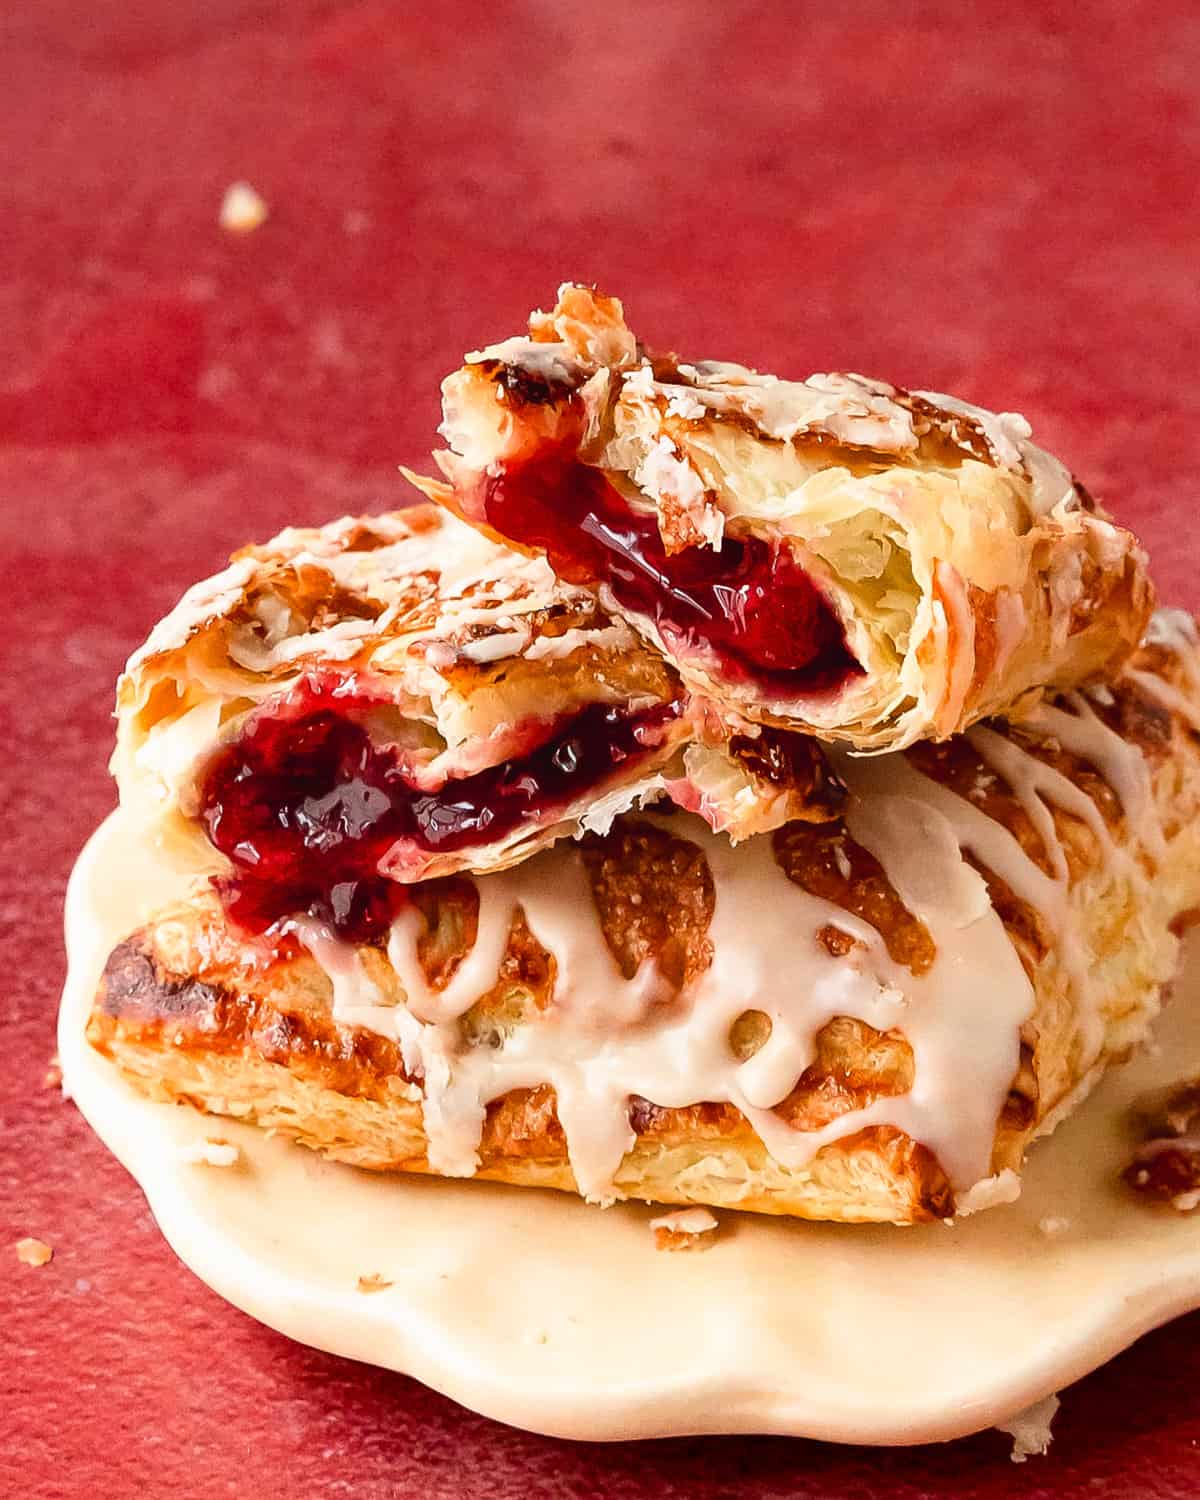 Cherry turnovers are a baked cherry pastry made using flaky puff pastry filled with sweet cherry pie filling. Top these buttery cherry puff pastry turnovers with a creamy vanilla glaze. They’re the perfect quick and easy breakfast or dessert. 